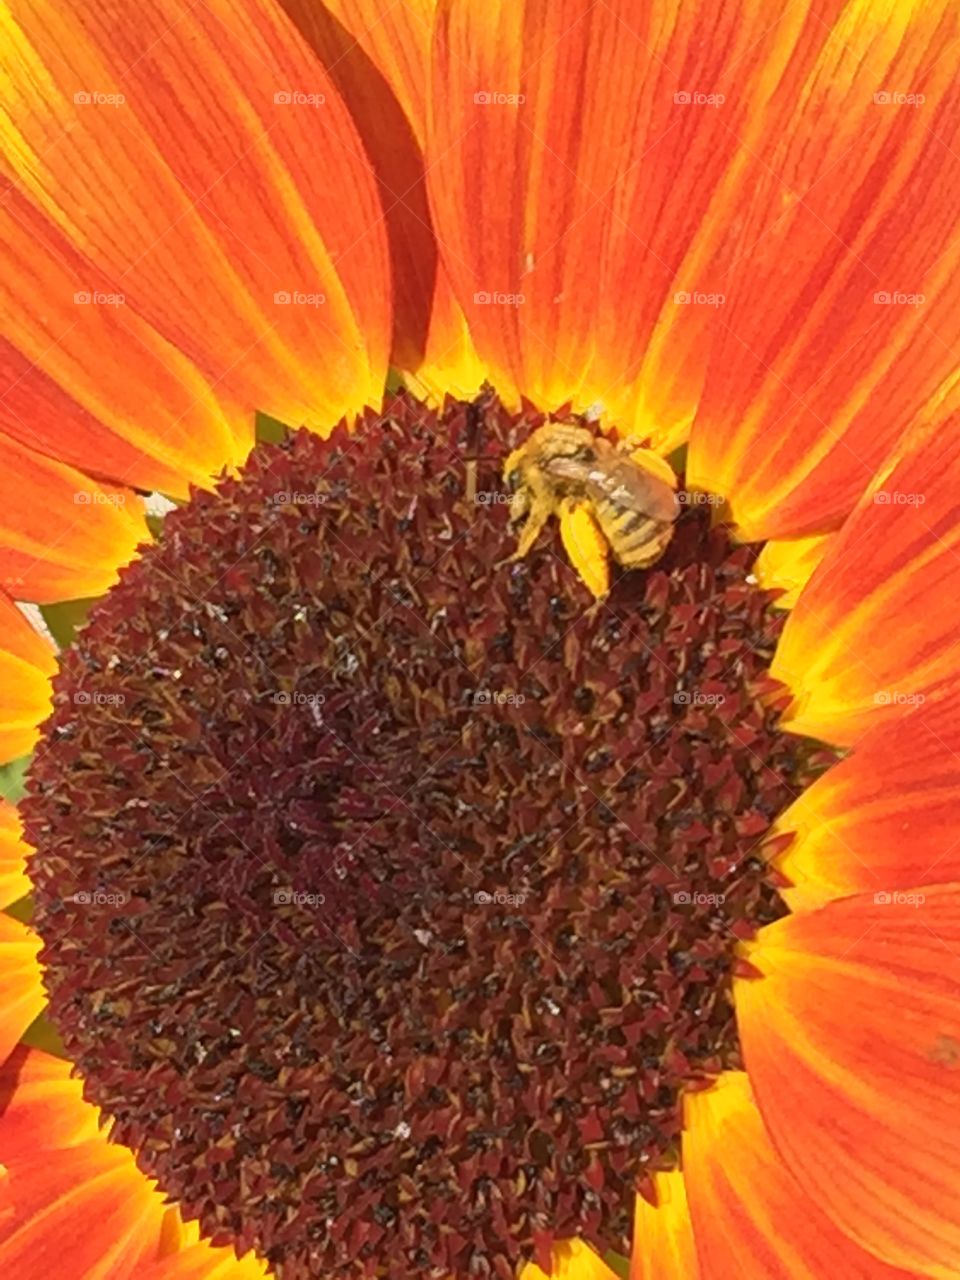 Bee on sunflower in bright morning sun angled